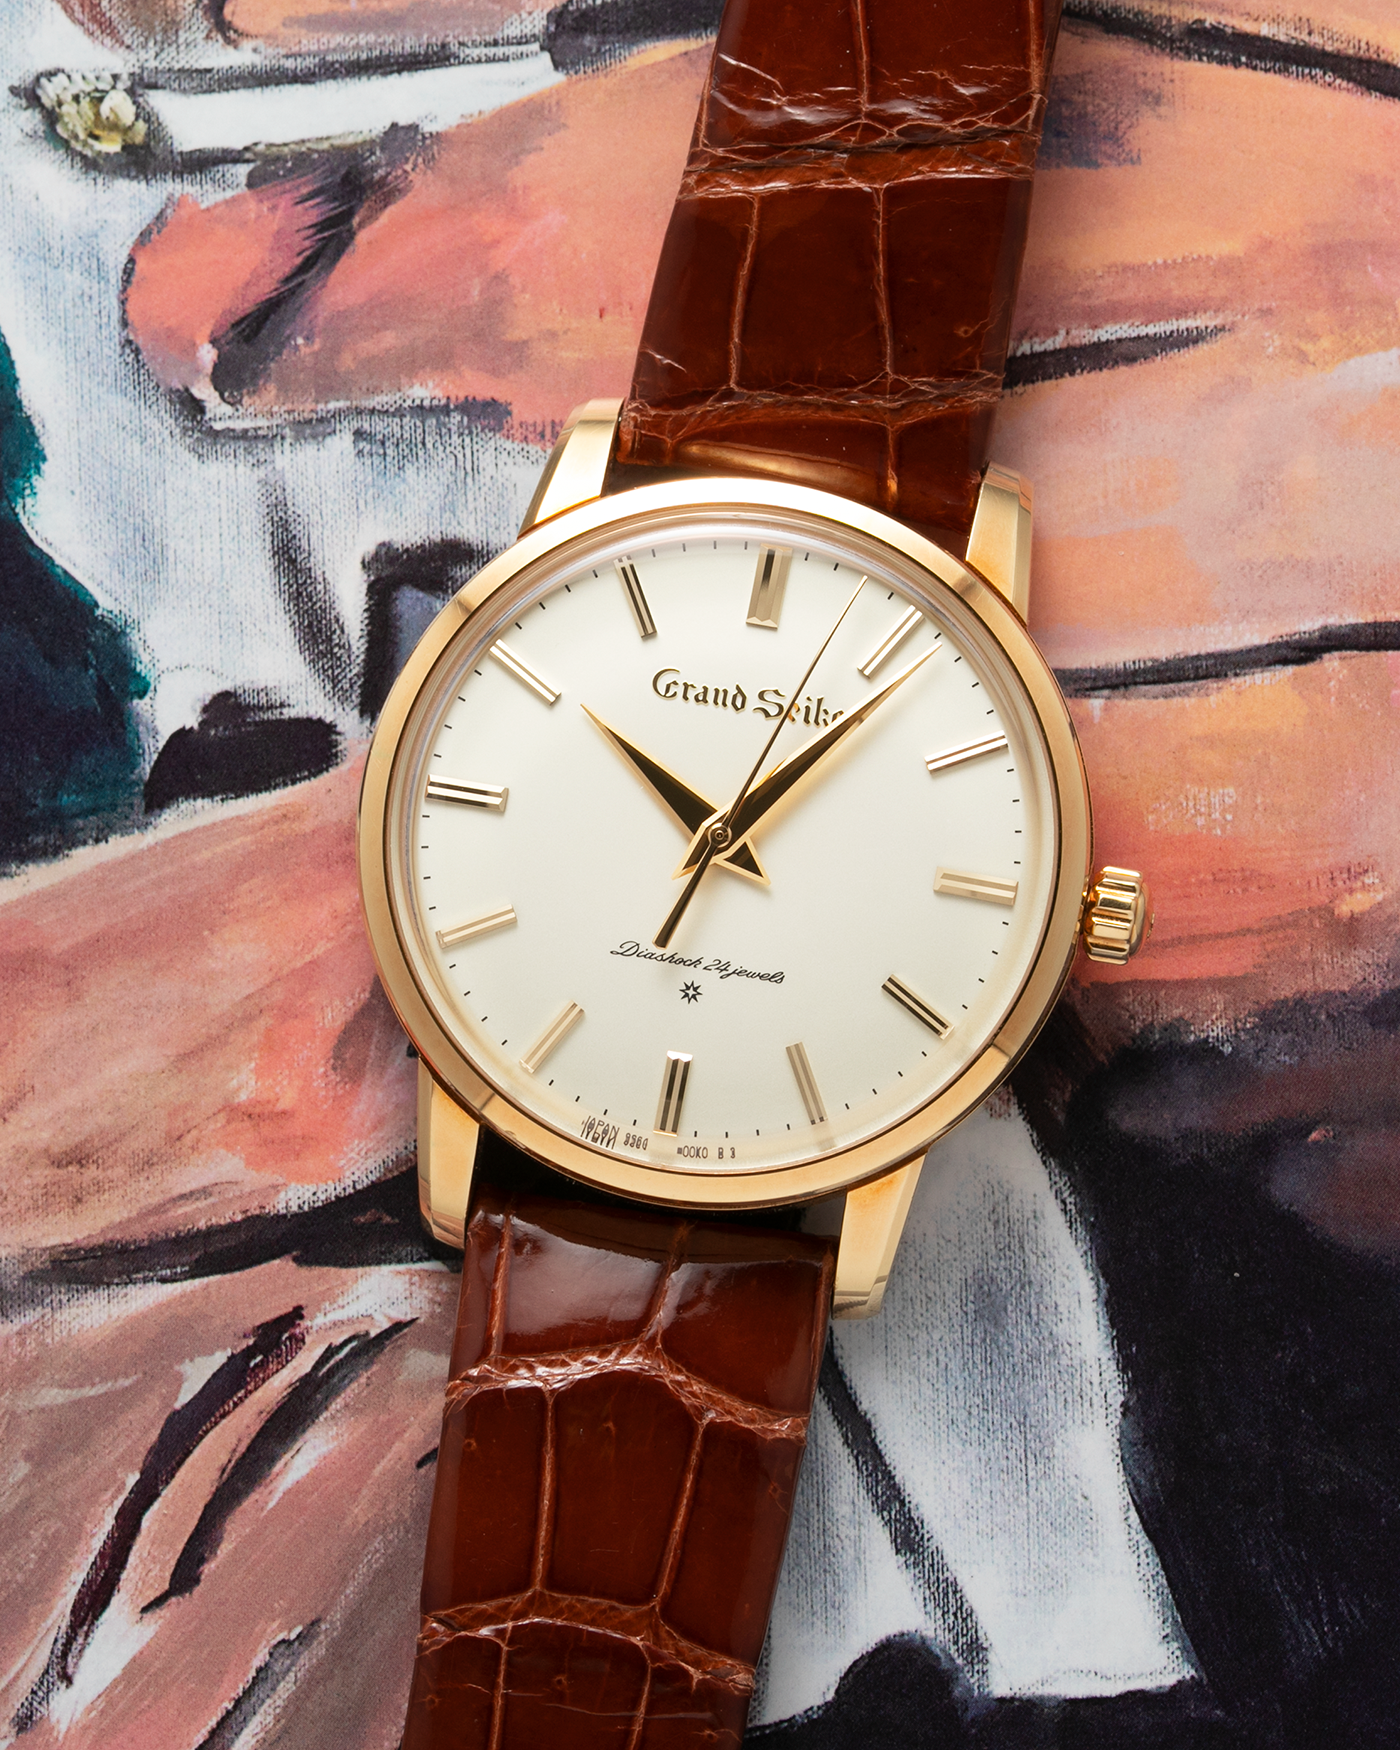 Brand: Grand Seiko Year: 2017 Model: SBGW252 Material: 18k Yellow Gold Movement: Manually wound Grand Seiko caliber 9S64 Case Diameter: 38mm Bracelet: Grand Seiko Chestnut Alligator Strap with 18k Yellow Gold Tang Buckle 